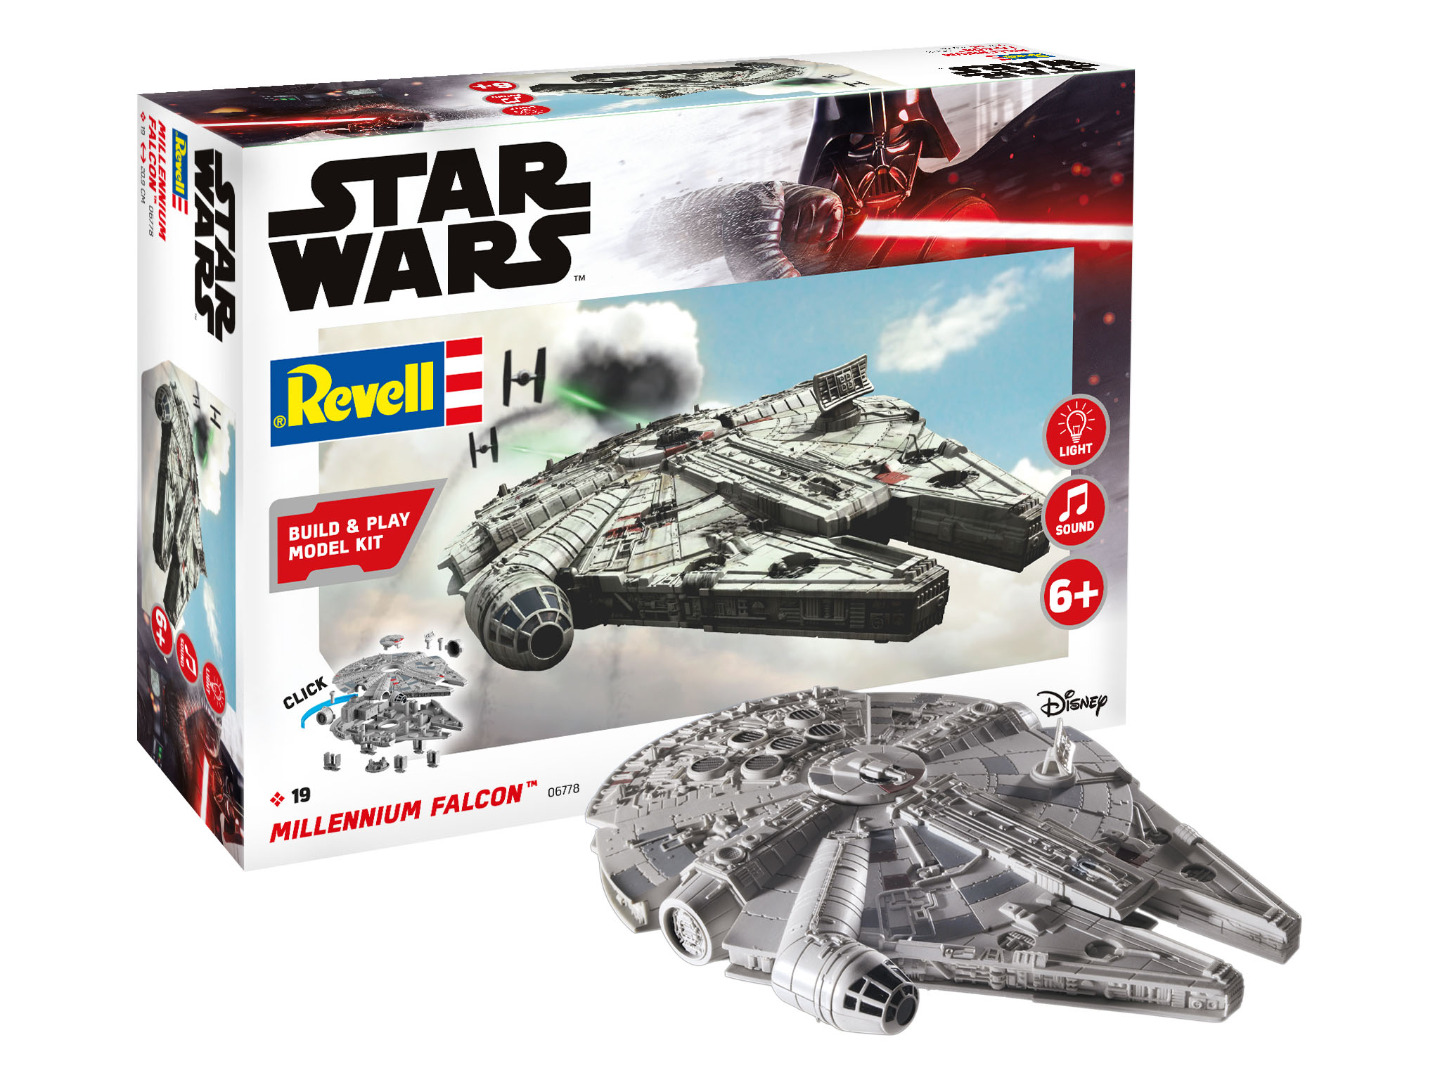 Revell Model Kit Star Wars Millennium Falcon Scale 1:164 (Build & Play)